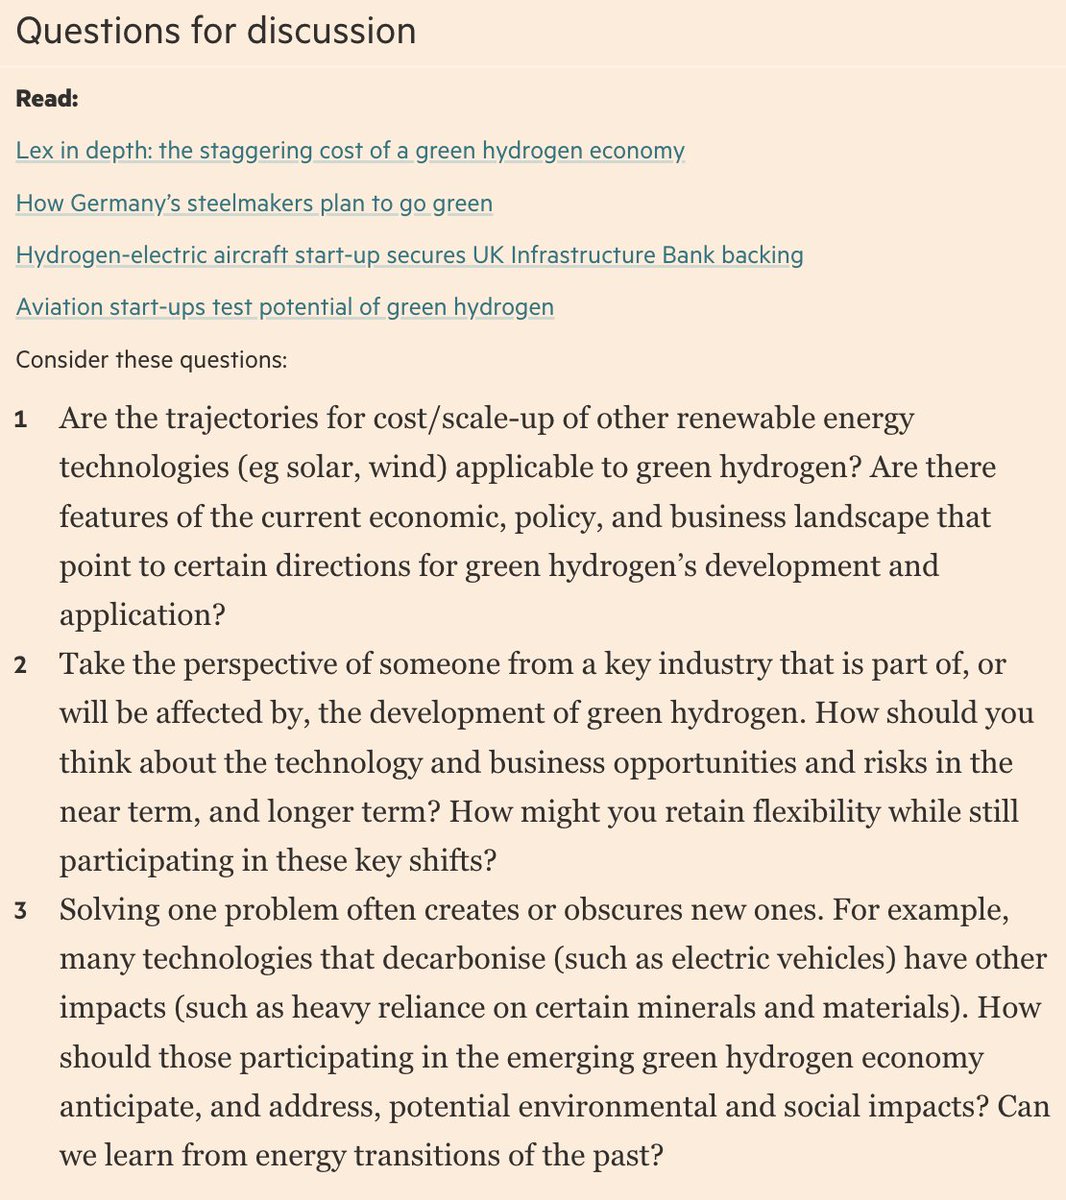 #ClimateAction: Business school teaching case study: can green hydrogen’s potential be realised? 🤔Many challenges remain before the fuel can play a full role in decarbonisation. Explore the issues with this ‘instant teaching case study’ @FT ft.com/content/c6dbcc…